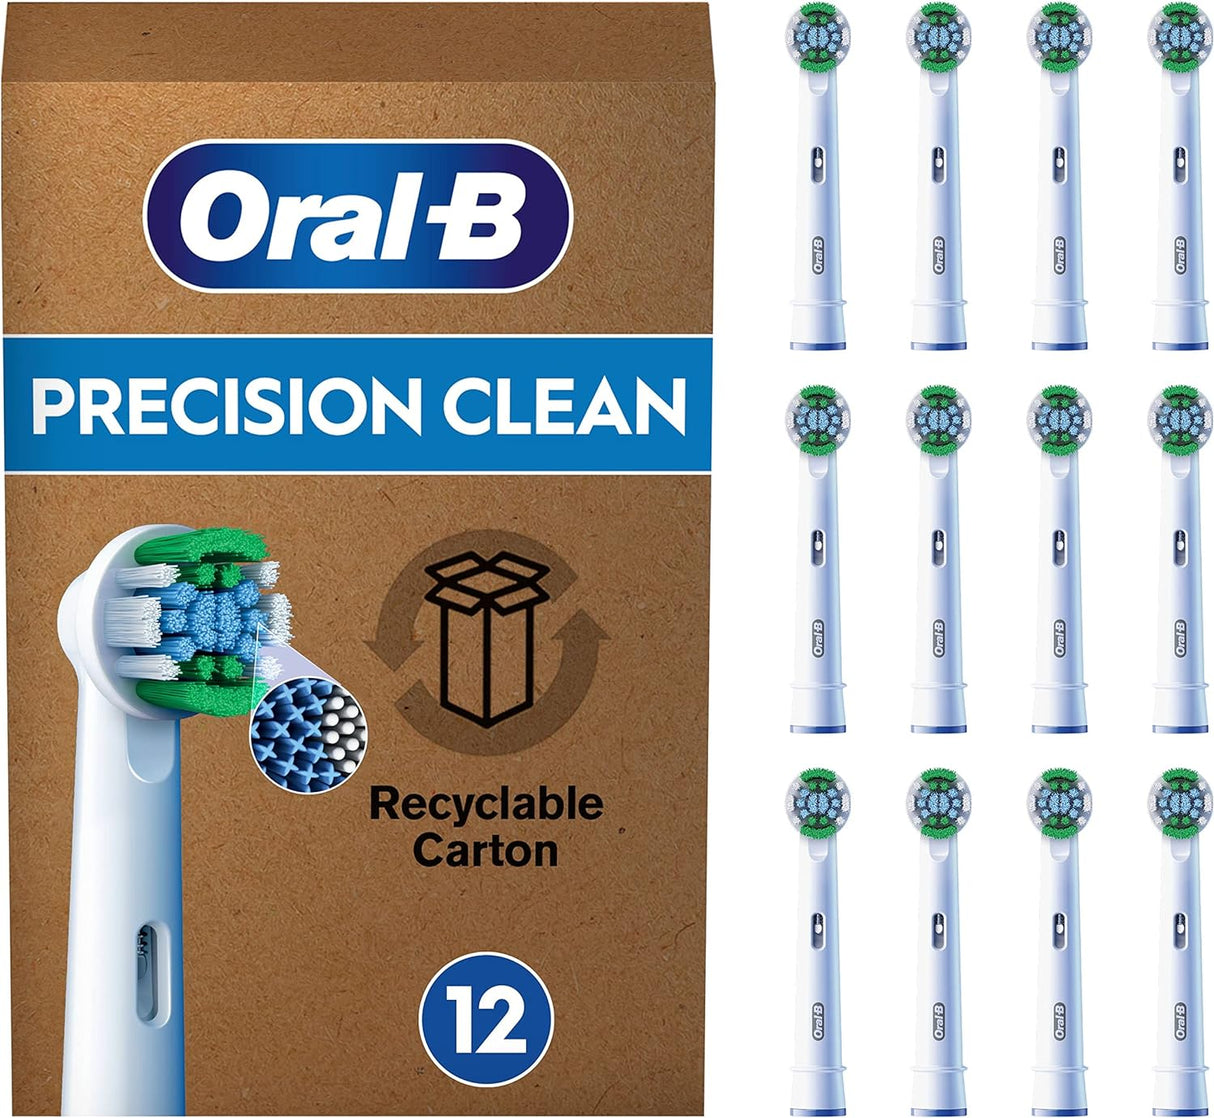 Oral-B Pro Precision Clean Electric Toothbrush Heads - 12 Pack